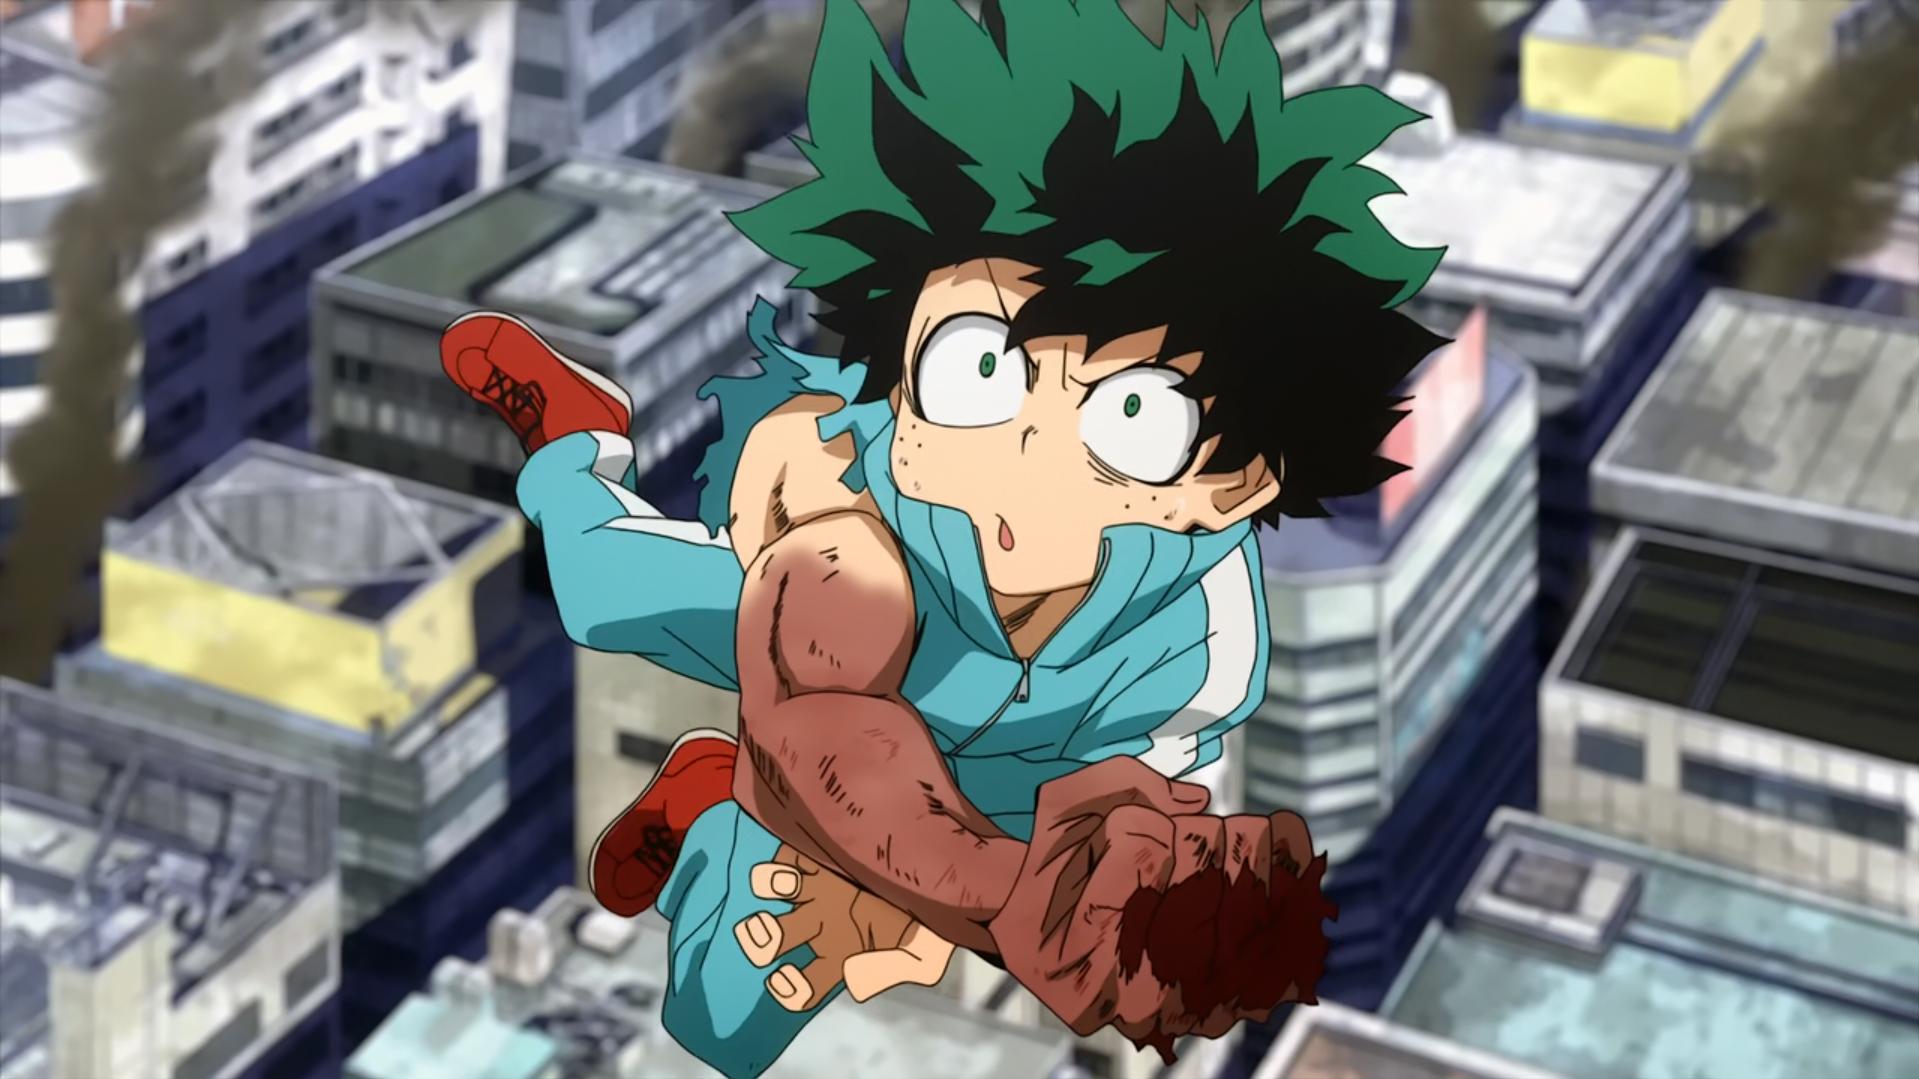 Download Deku My Hero Academia Anime One For All Full Cowling Wallpaper |  Wallpapers.com